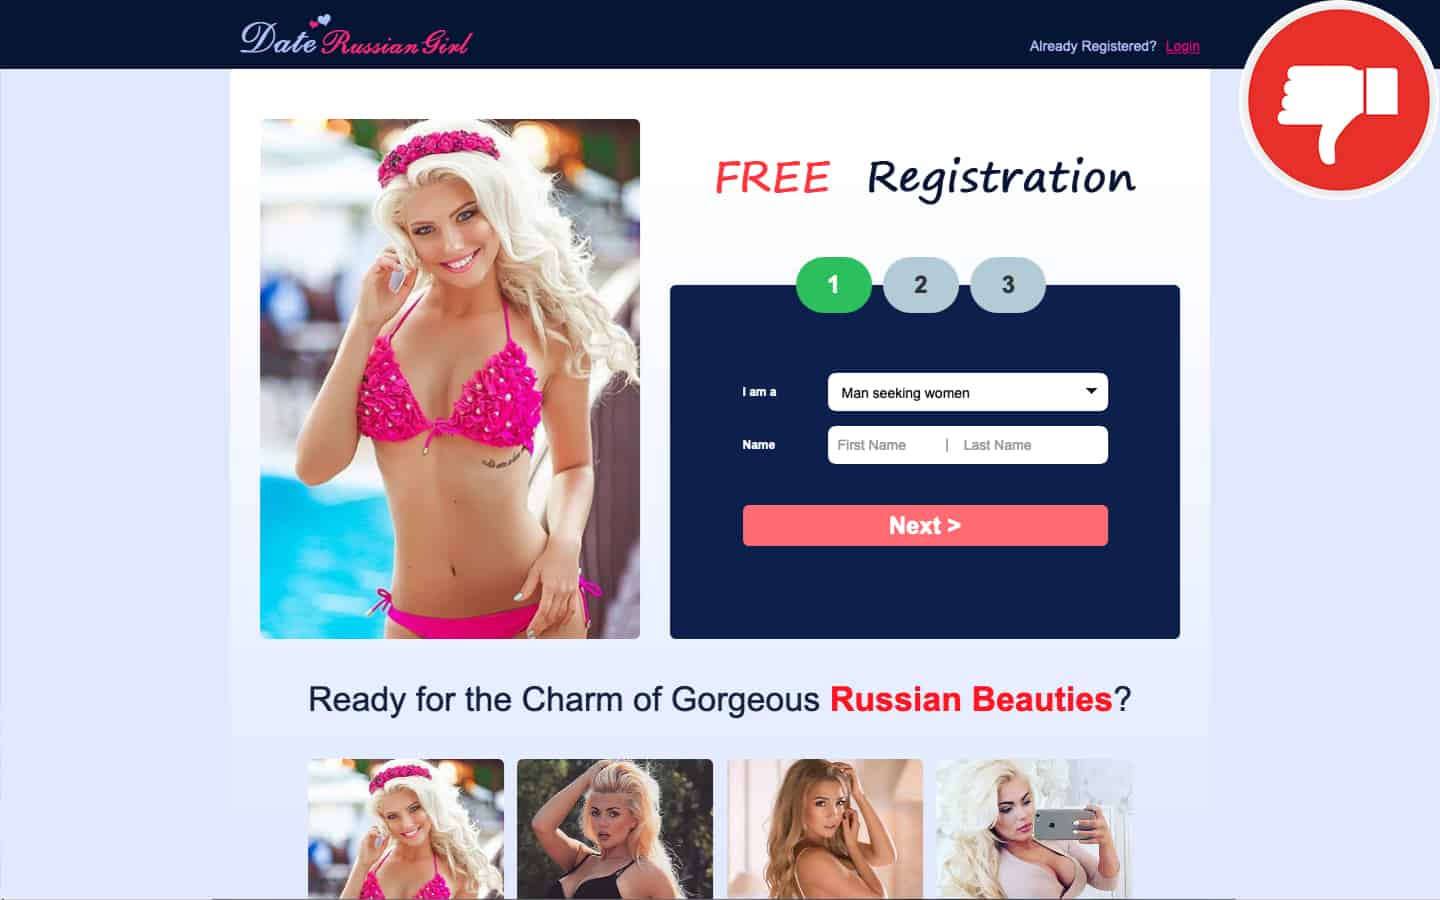 DateRussianGirl.com review Scam